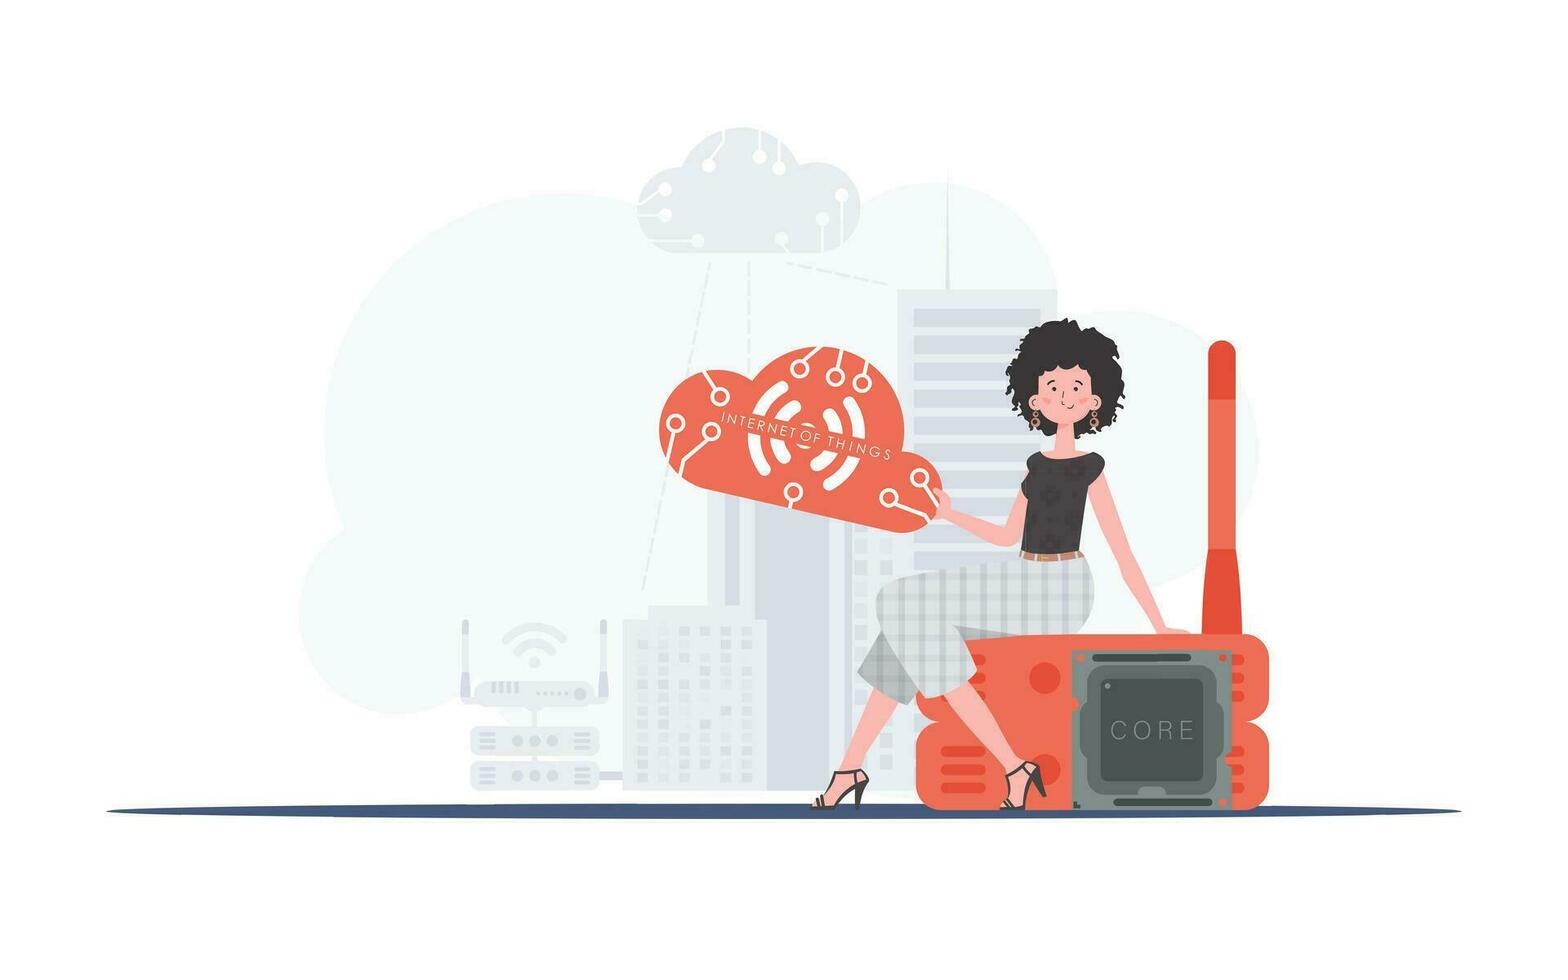 Internet of things and automation concept. A woman sits on a router and holds the internet of things logo in her hands. Vector illustration in flat style.